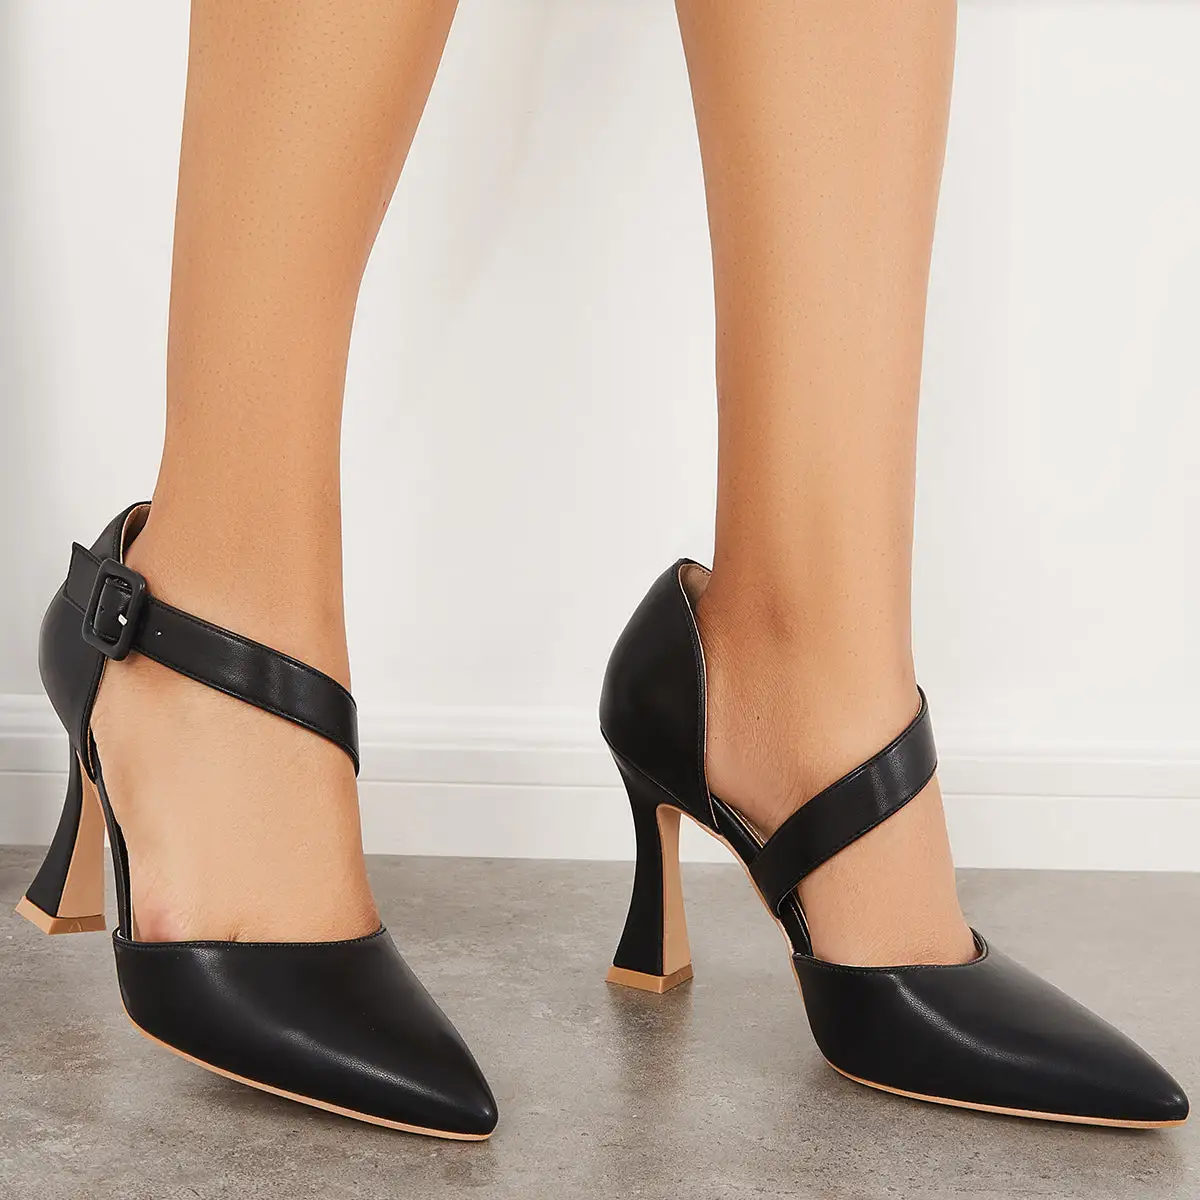 Classic Pointed Toe Pyramid Heels One Cross Strap Pumps